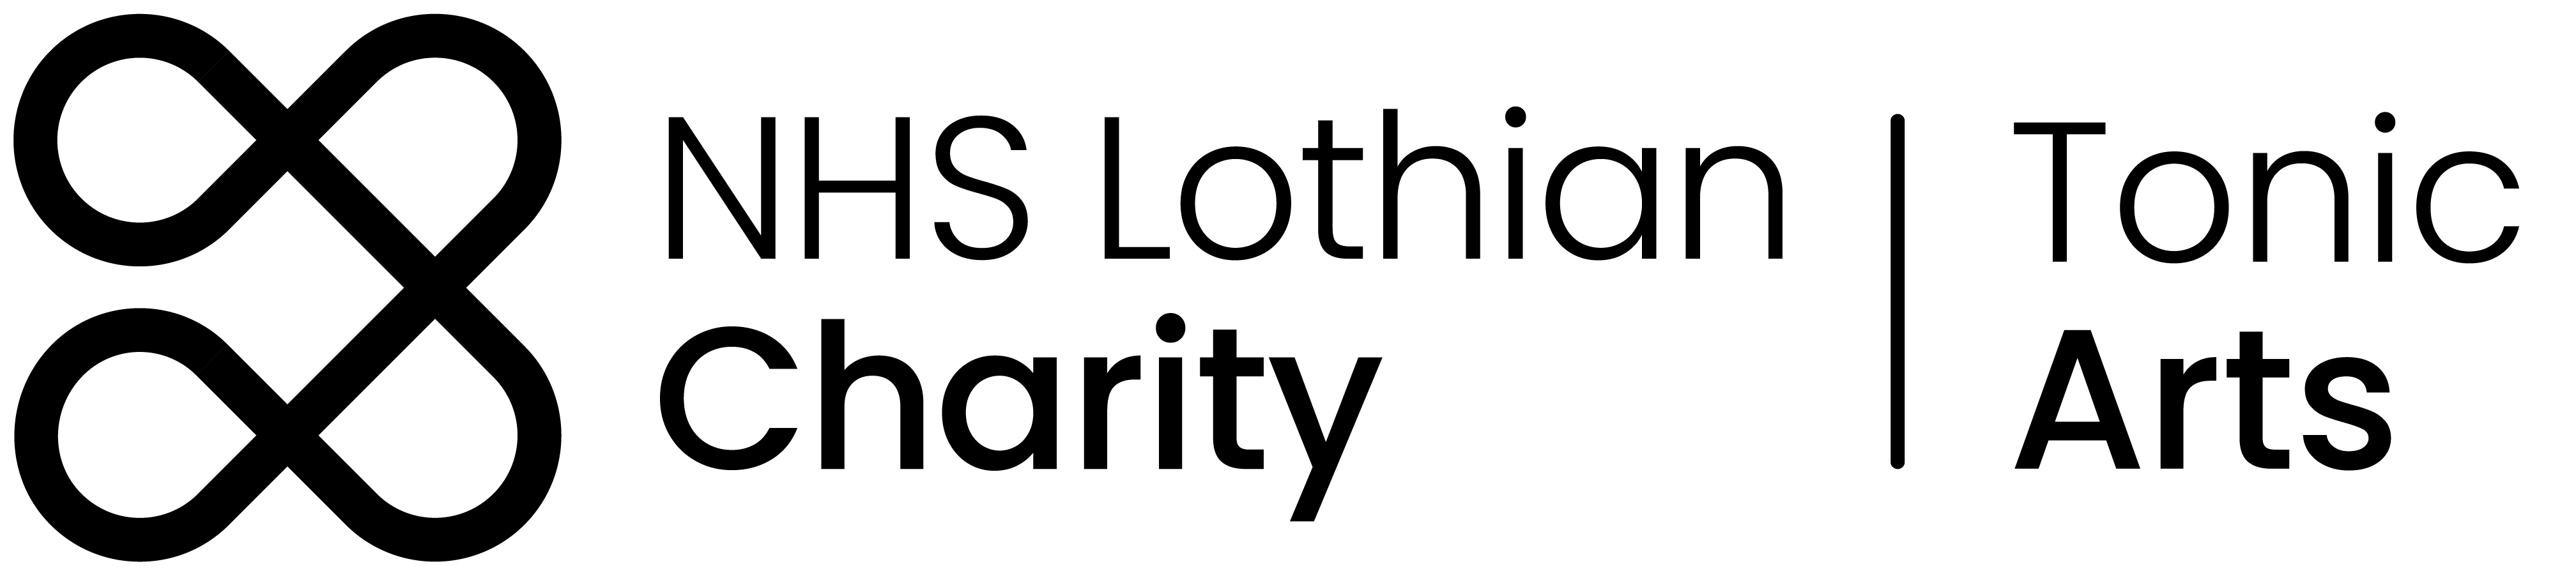 NHS Lothian Charity – Tonic Collection